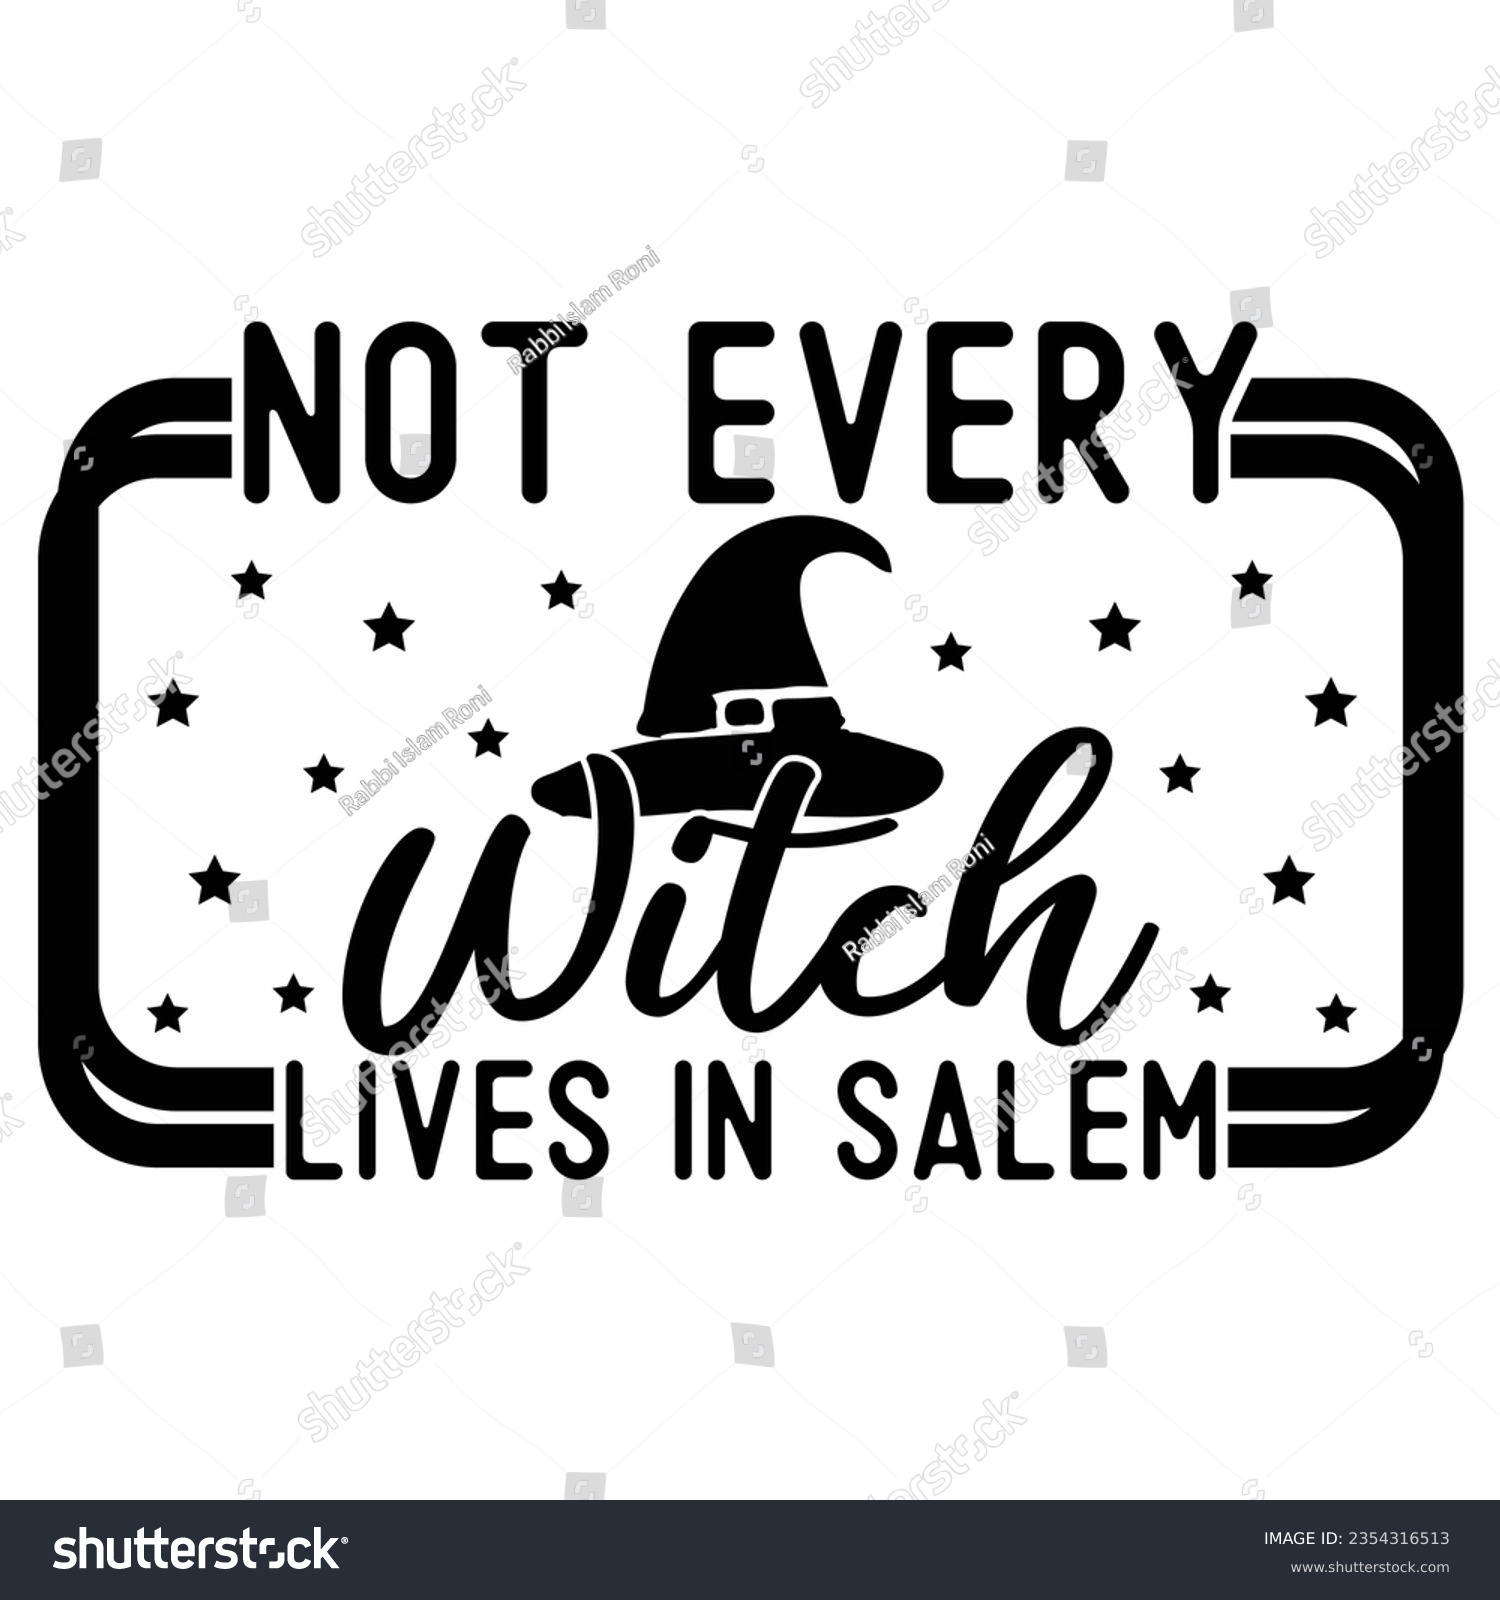 SVG of Not Every Witch Lives in Salem, Halloween quotes SVG cut files Design svg